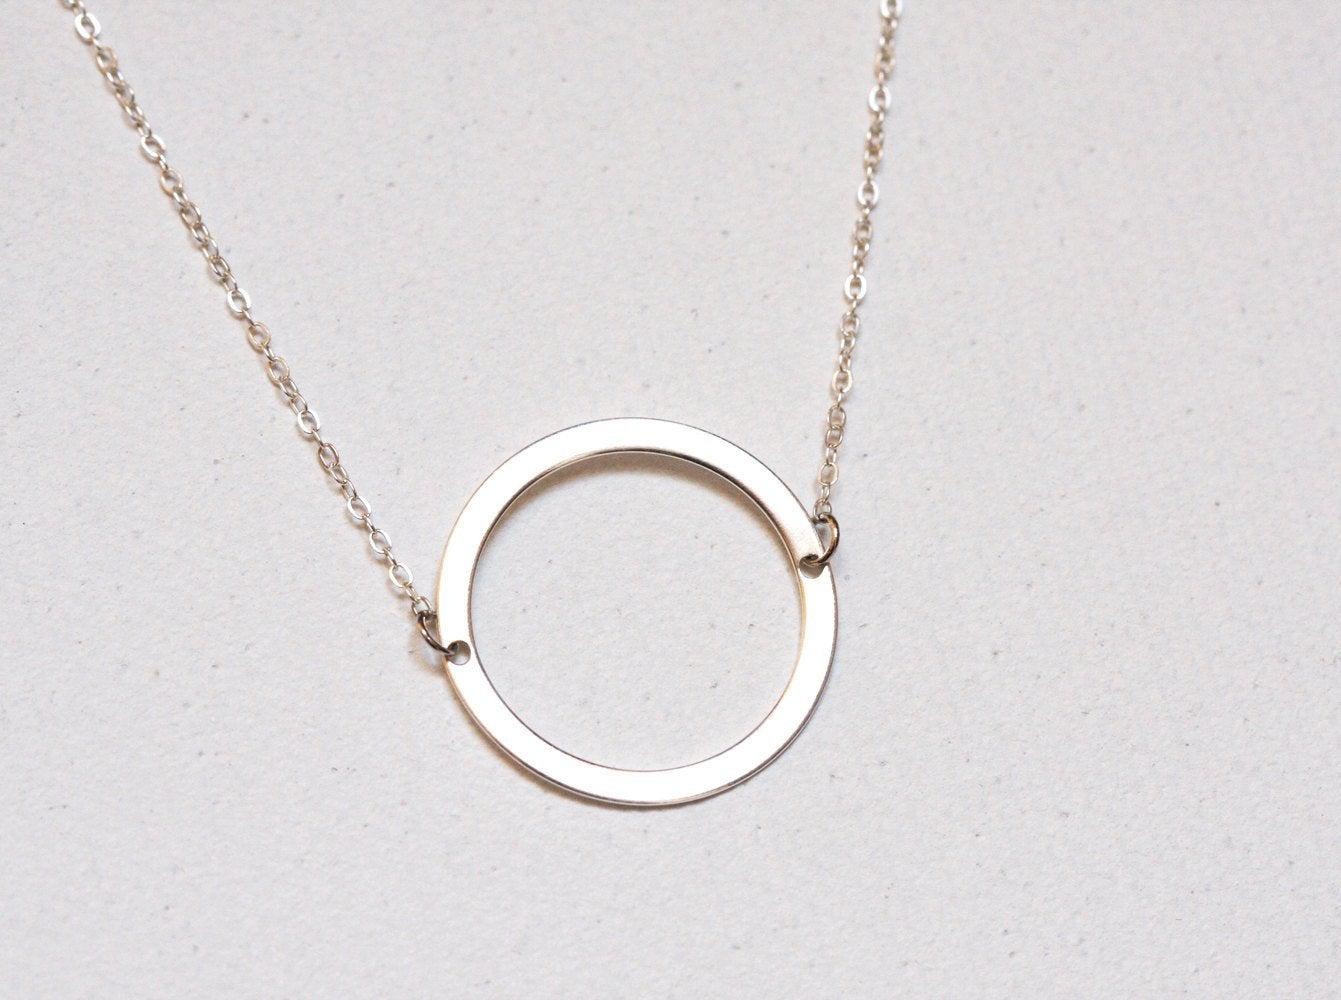 Silver hollow circle karma chain necklace